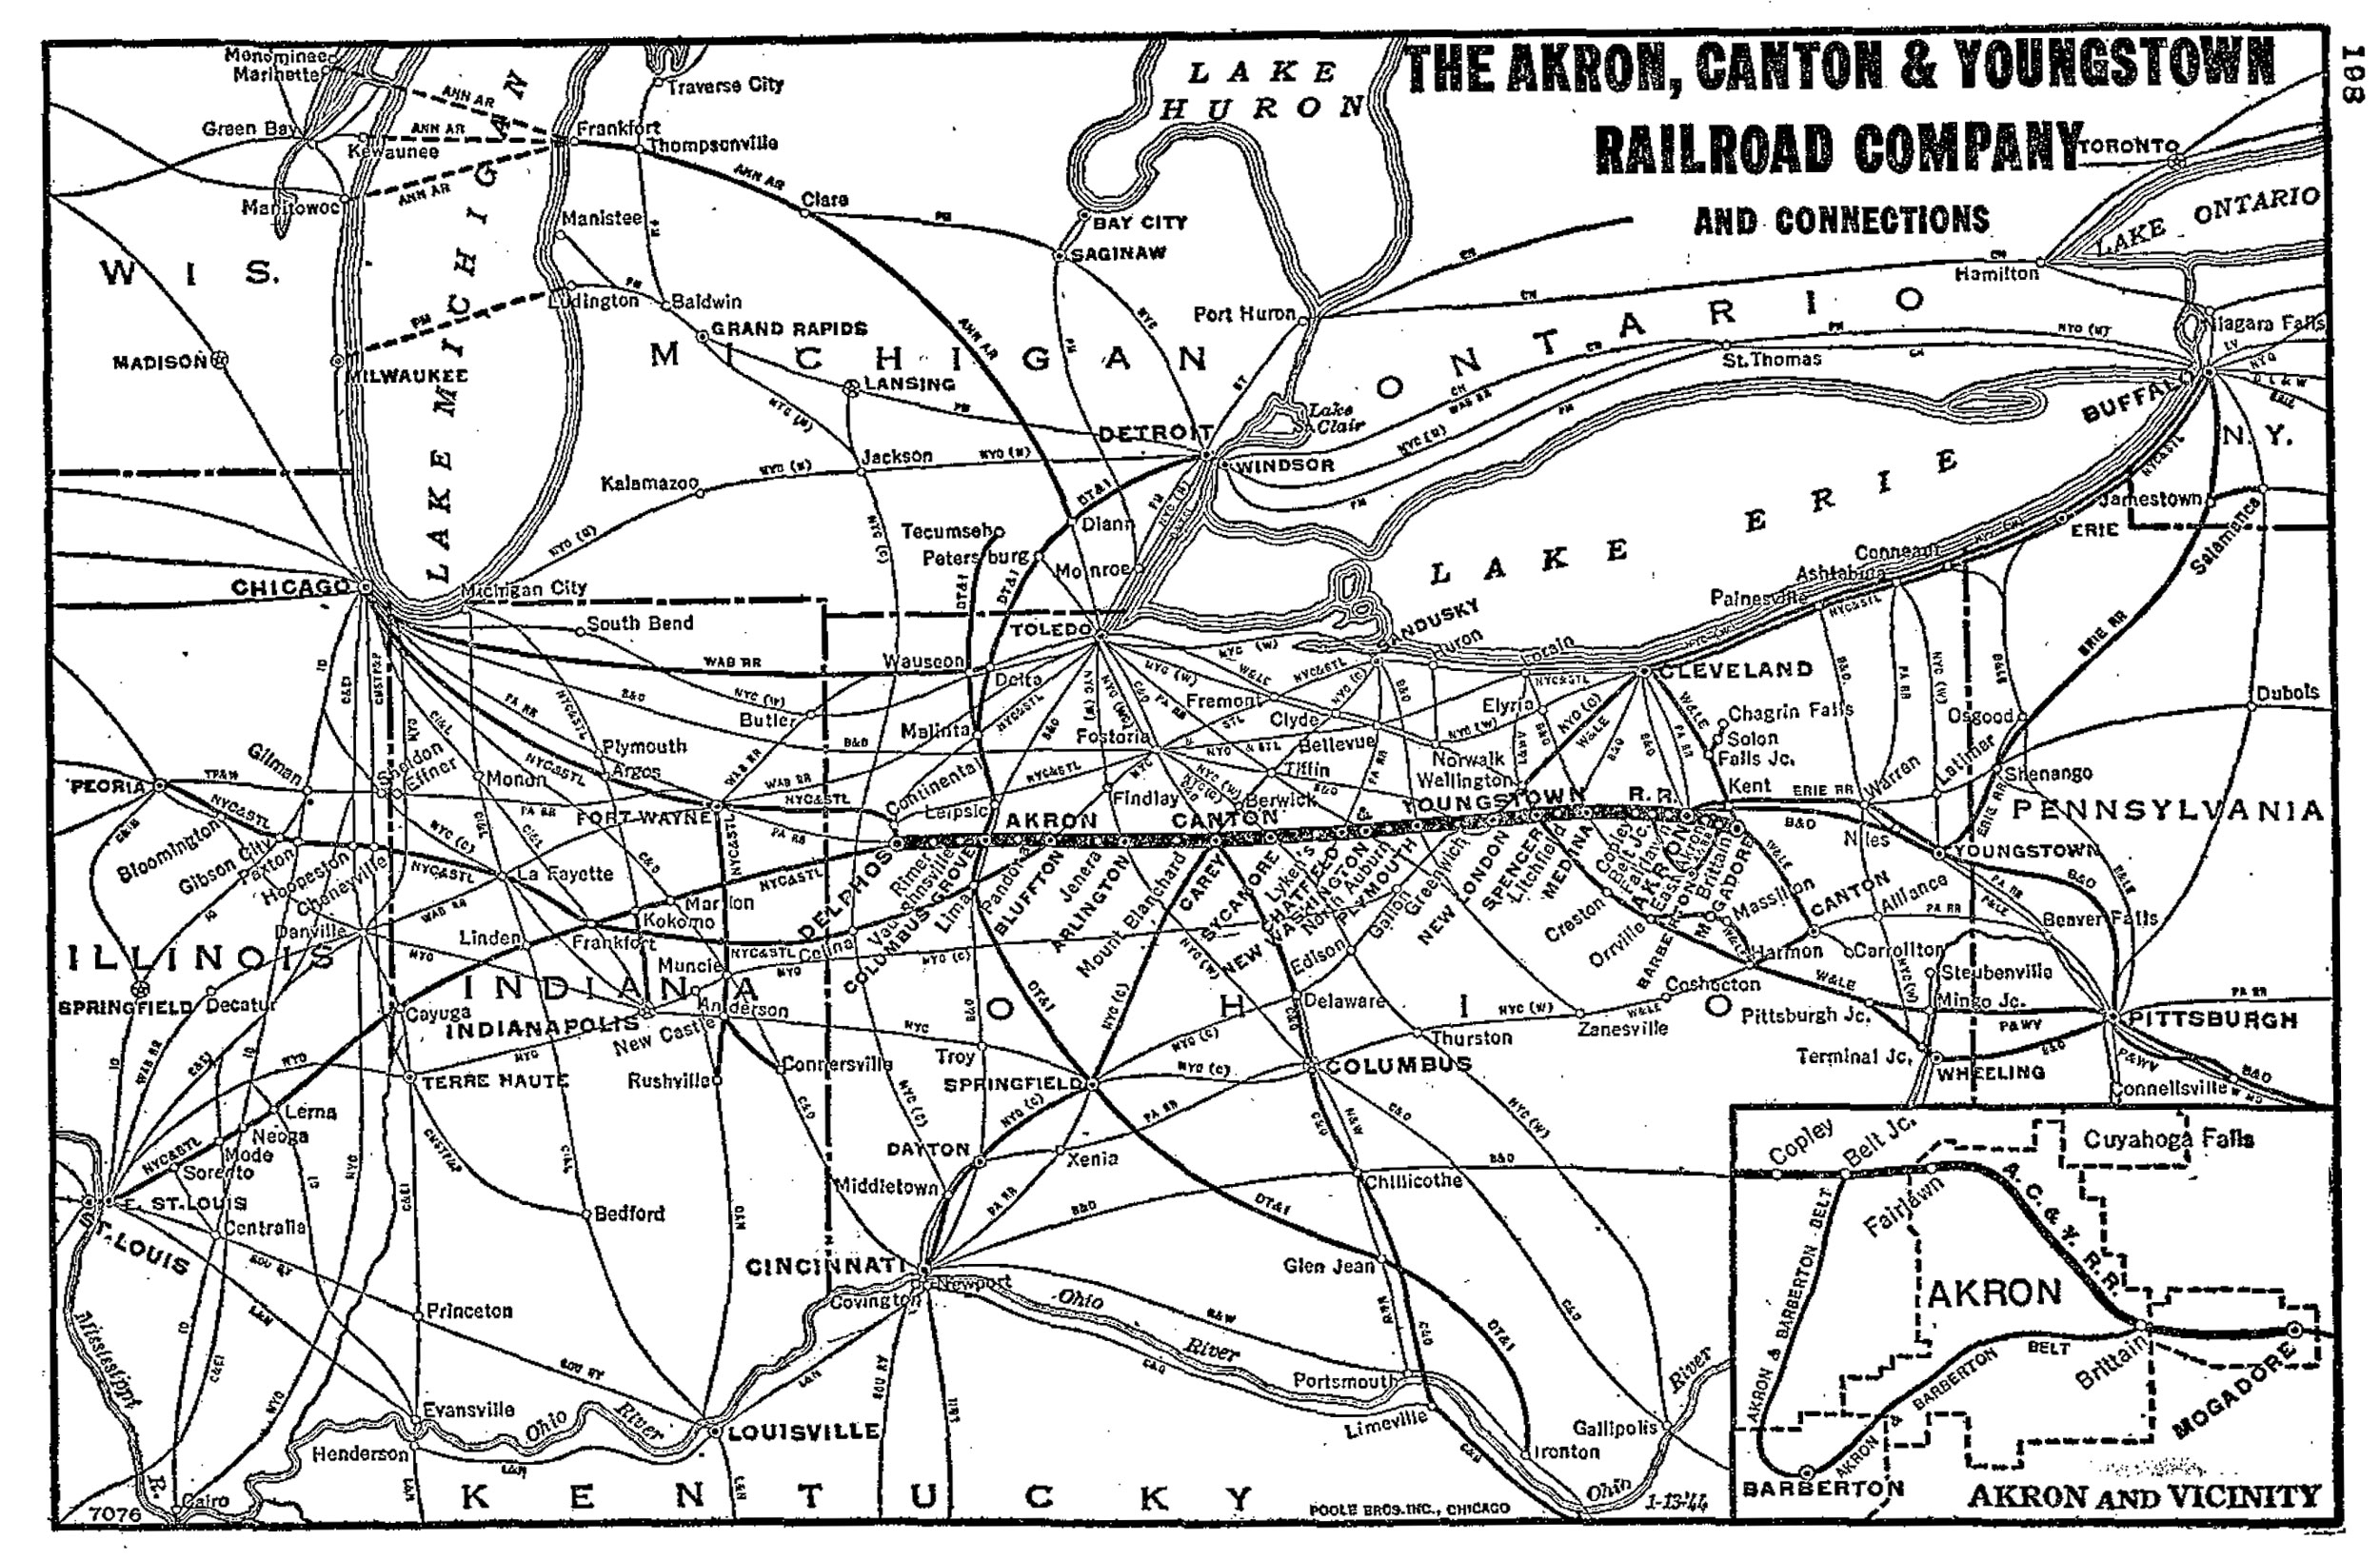 The Akron Canton And Youngstown Railroad